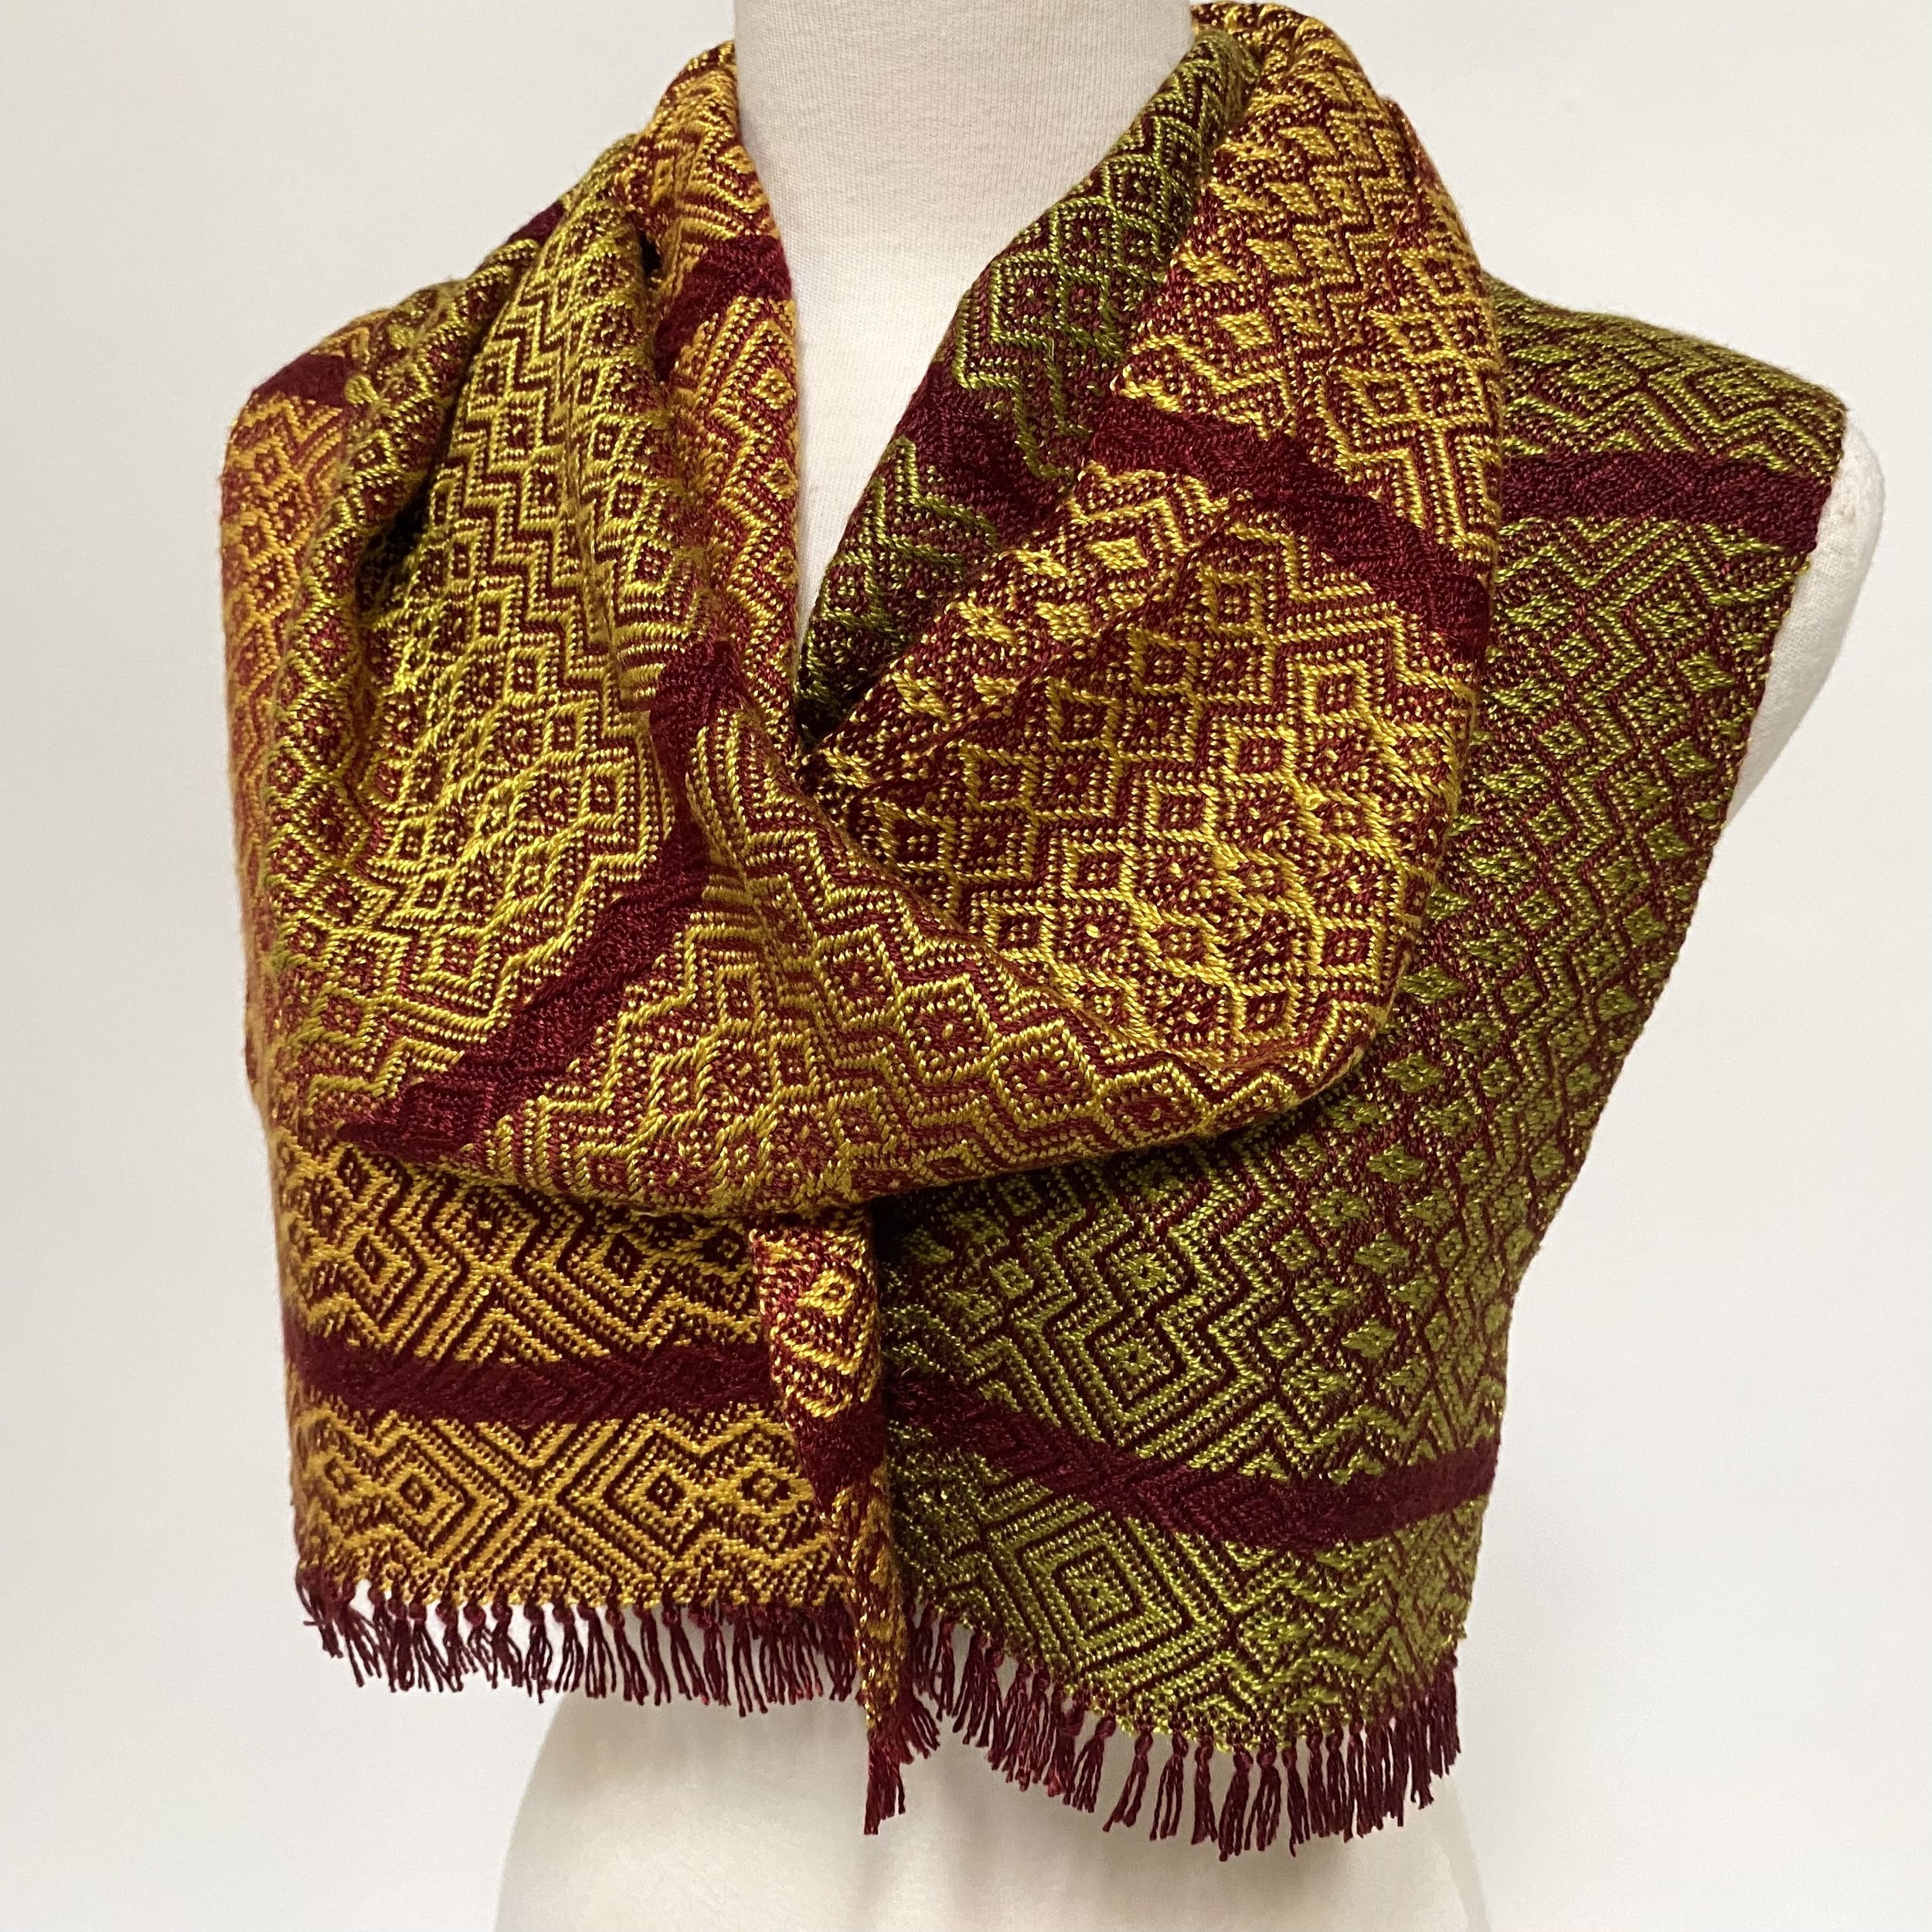   Autumn Inspiration Handwoven Scarf 3       For more details by clicking on this link.   